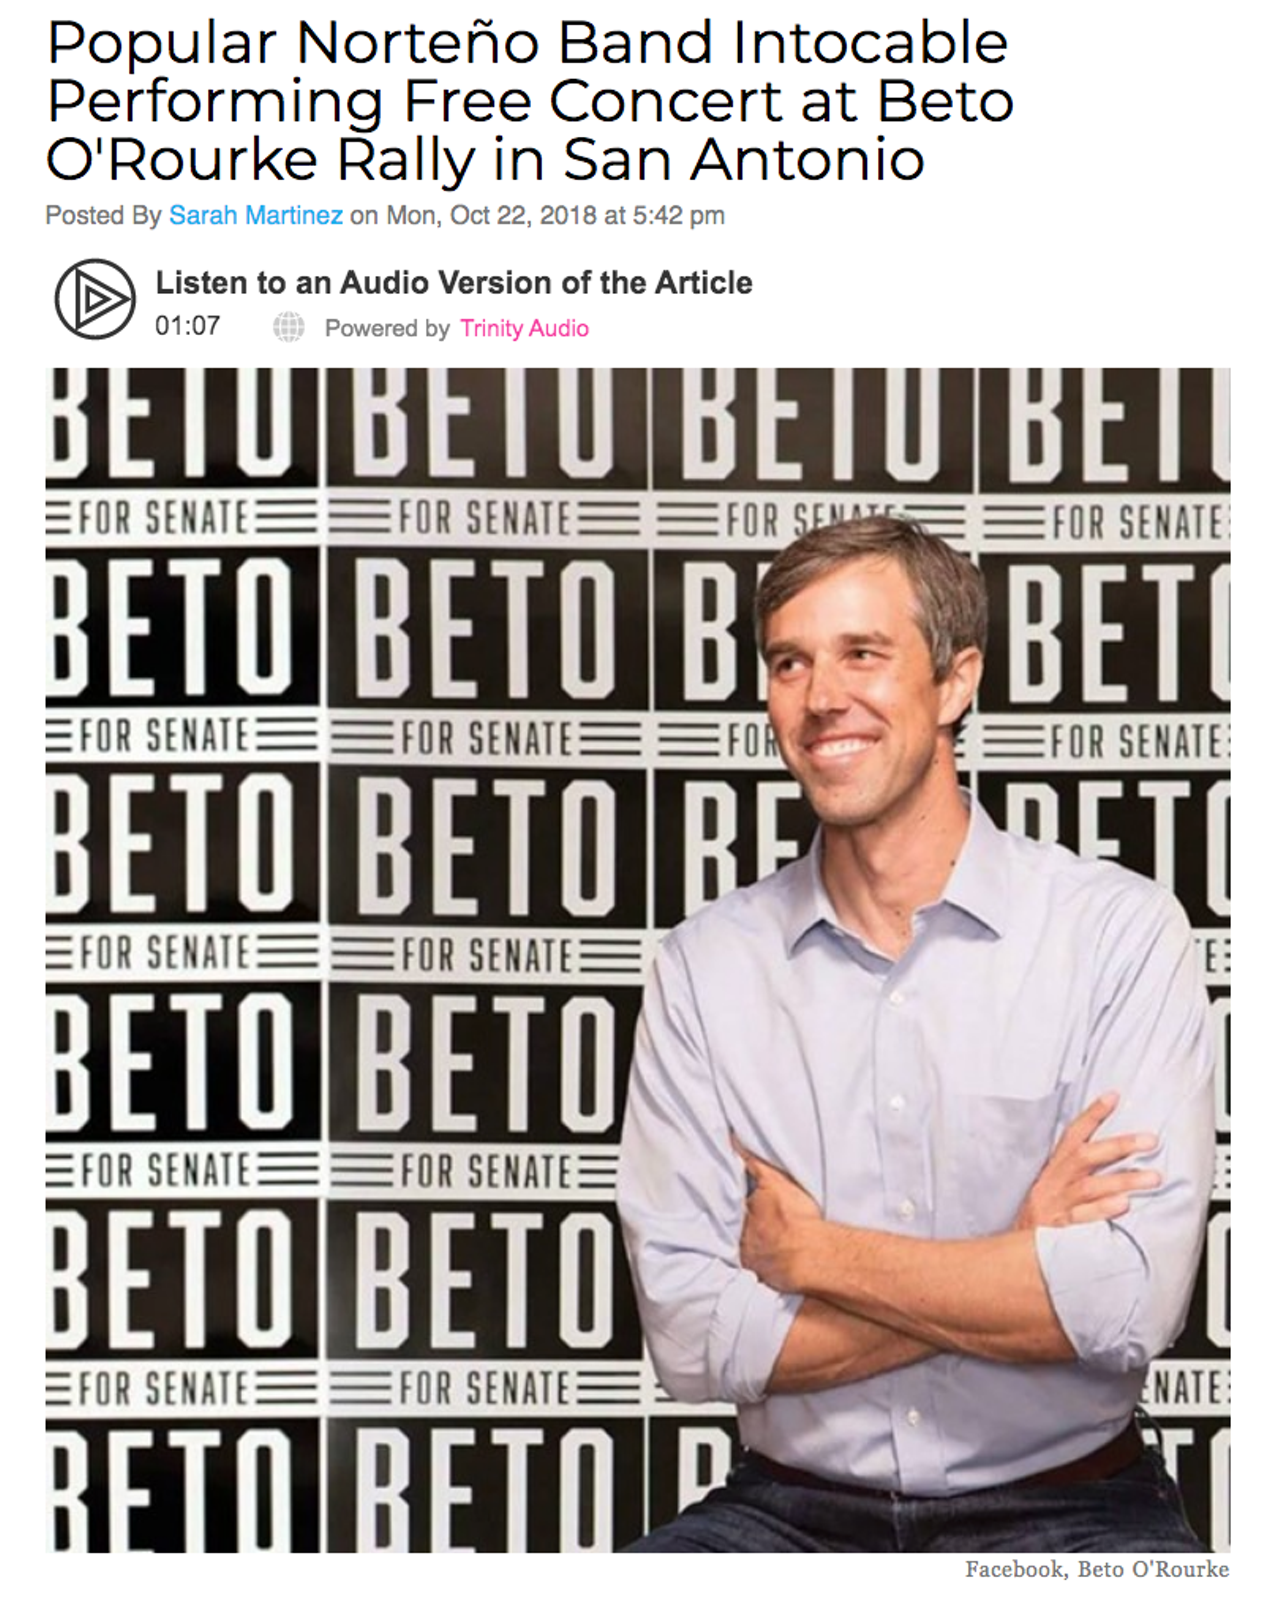 When he was still trying to be our senator, Beto O'Rourke's 2018 campaign included a stop in San Antonio. And said stop featured a performance from Intocable, likely to prove he's a man of the people. Read more here.